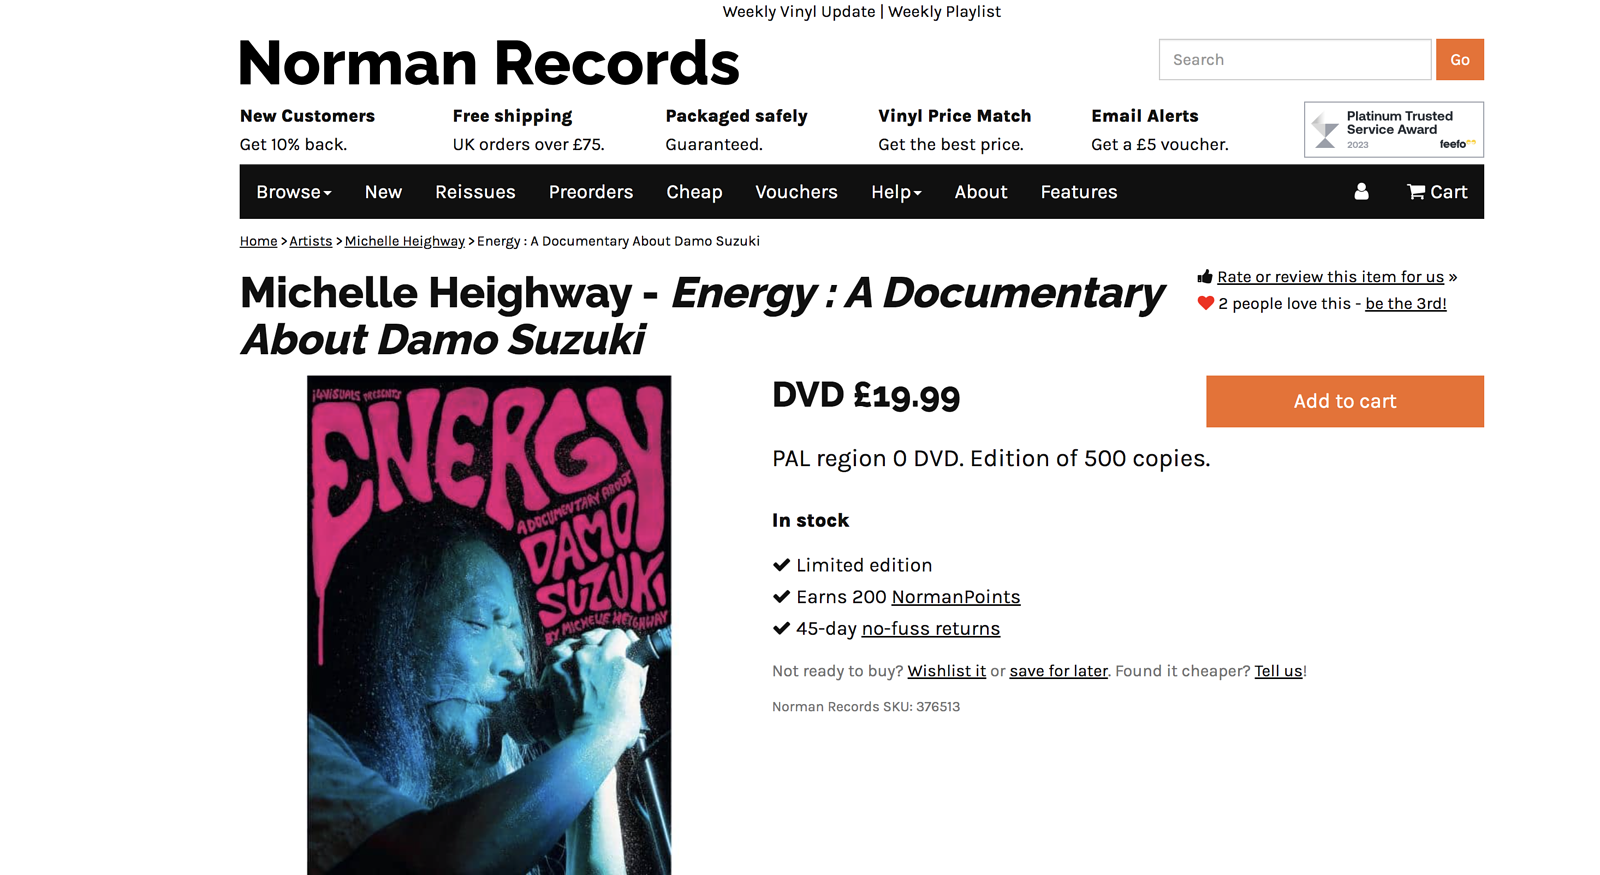 Energy: A Documentary About Damo Suzuki - Available as a limited DVD run of 500.